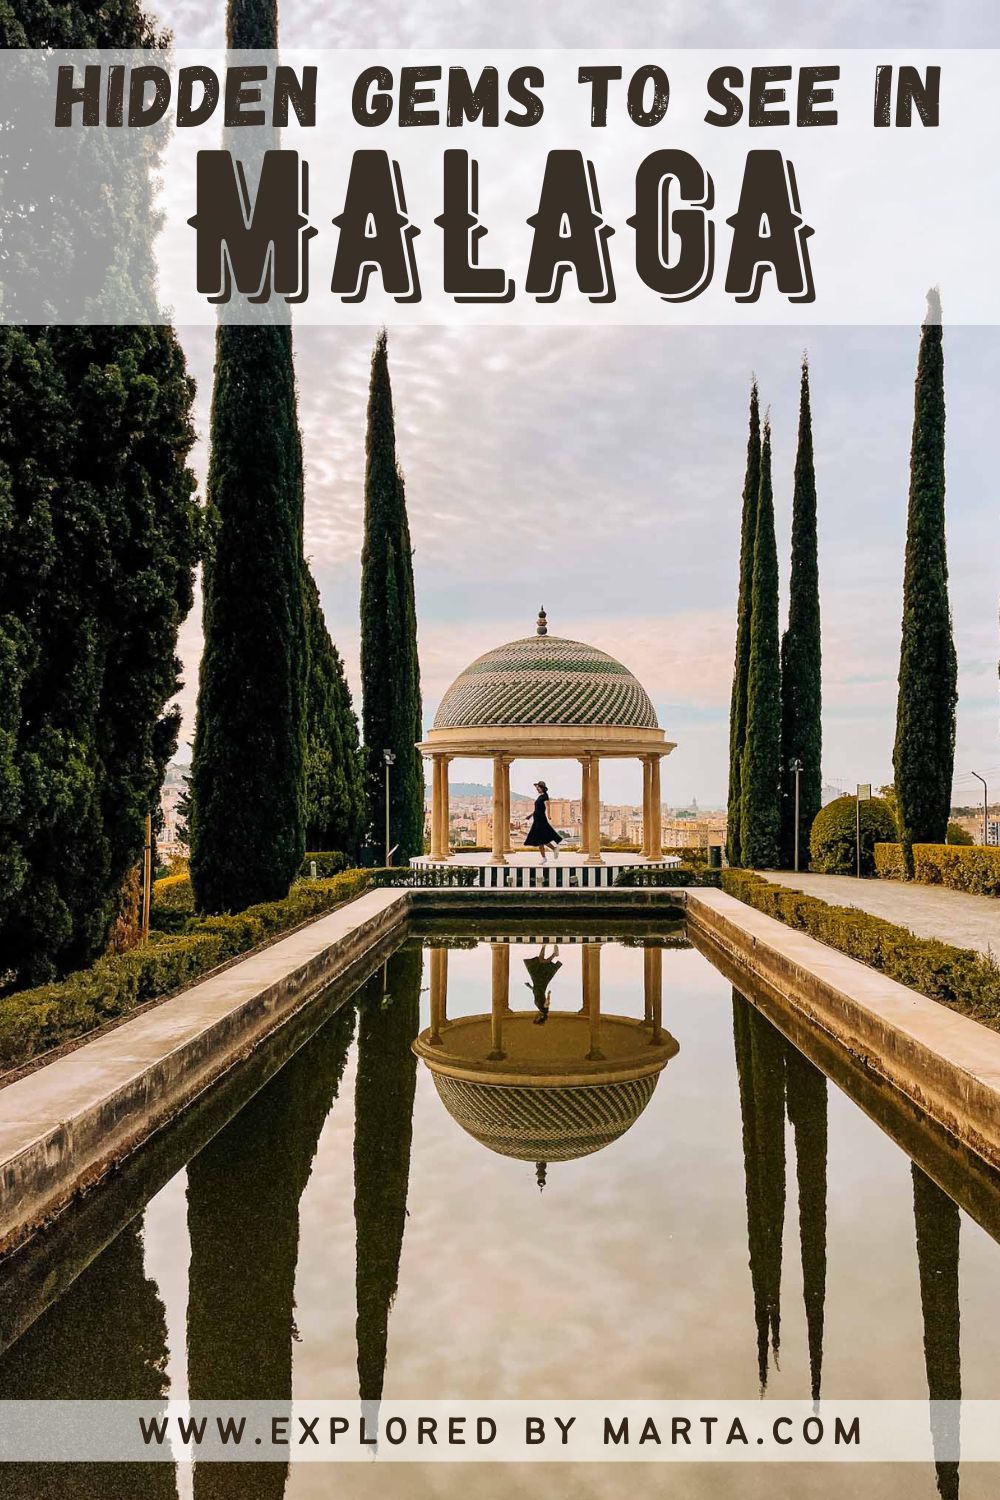 Hidden gems you need to see in Malaga, Spain